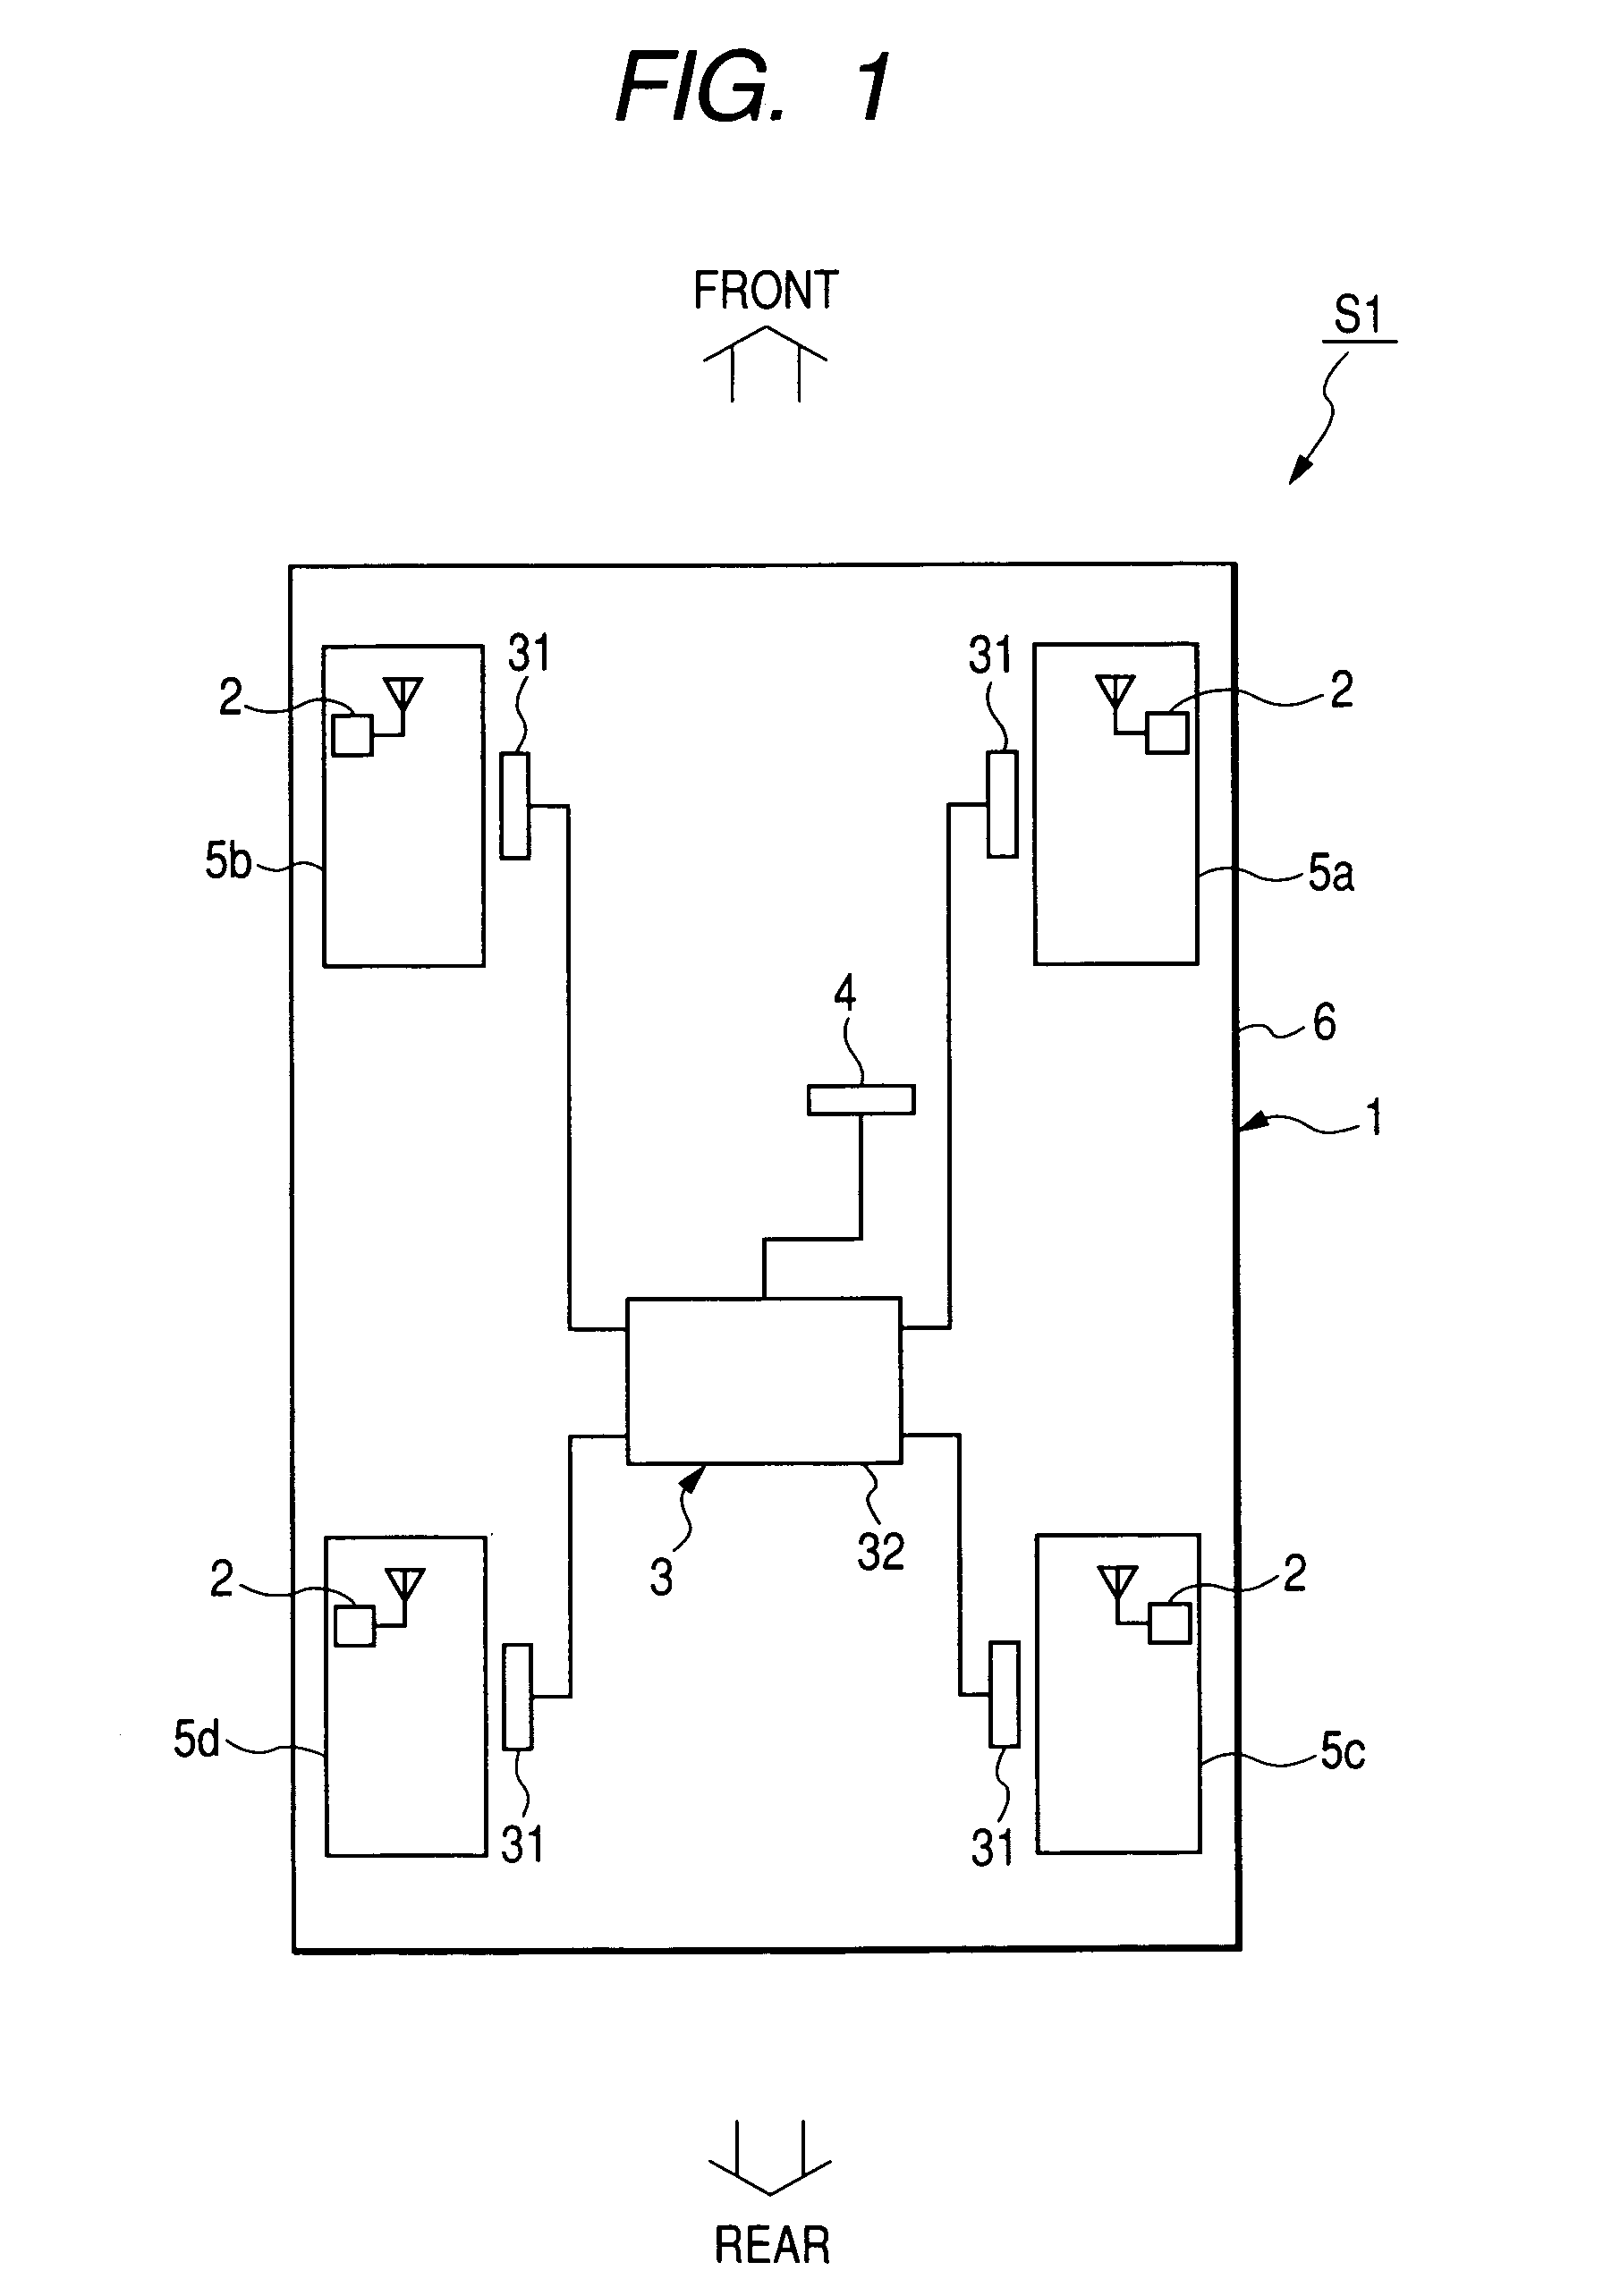 Tire inflation pressure sensing apparatus with command signal receiver having variable receiver sensitivity